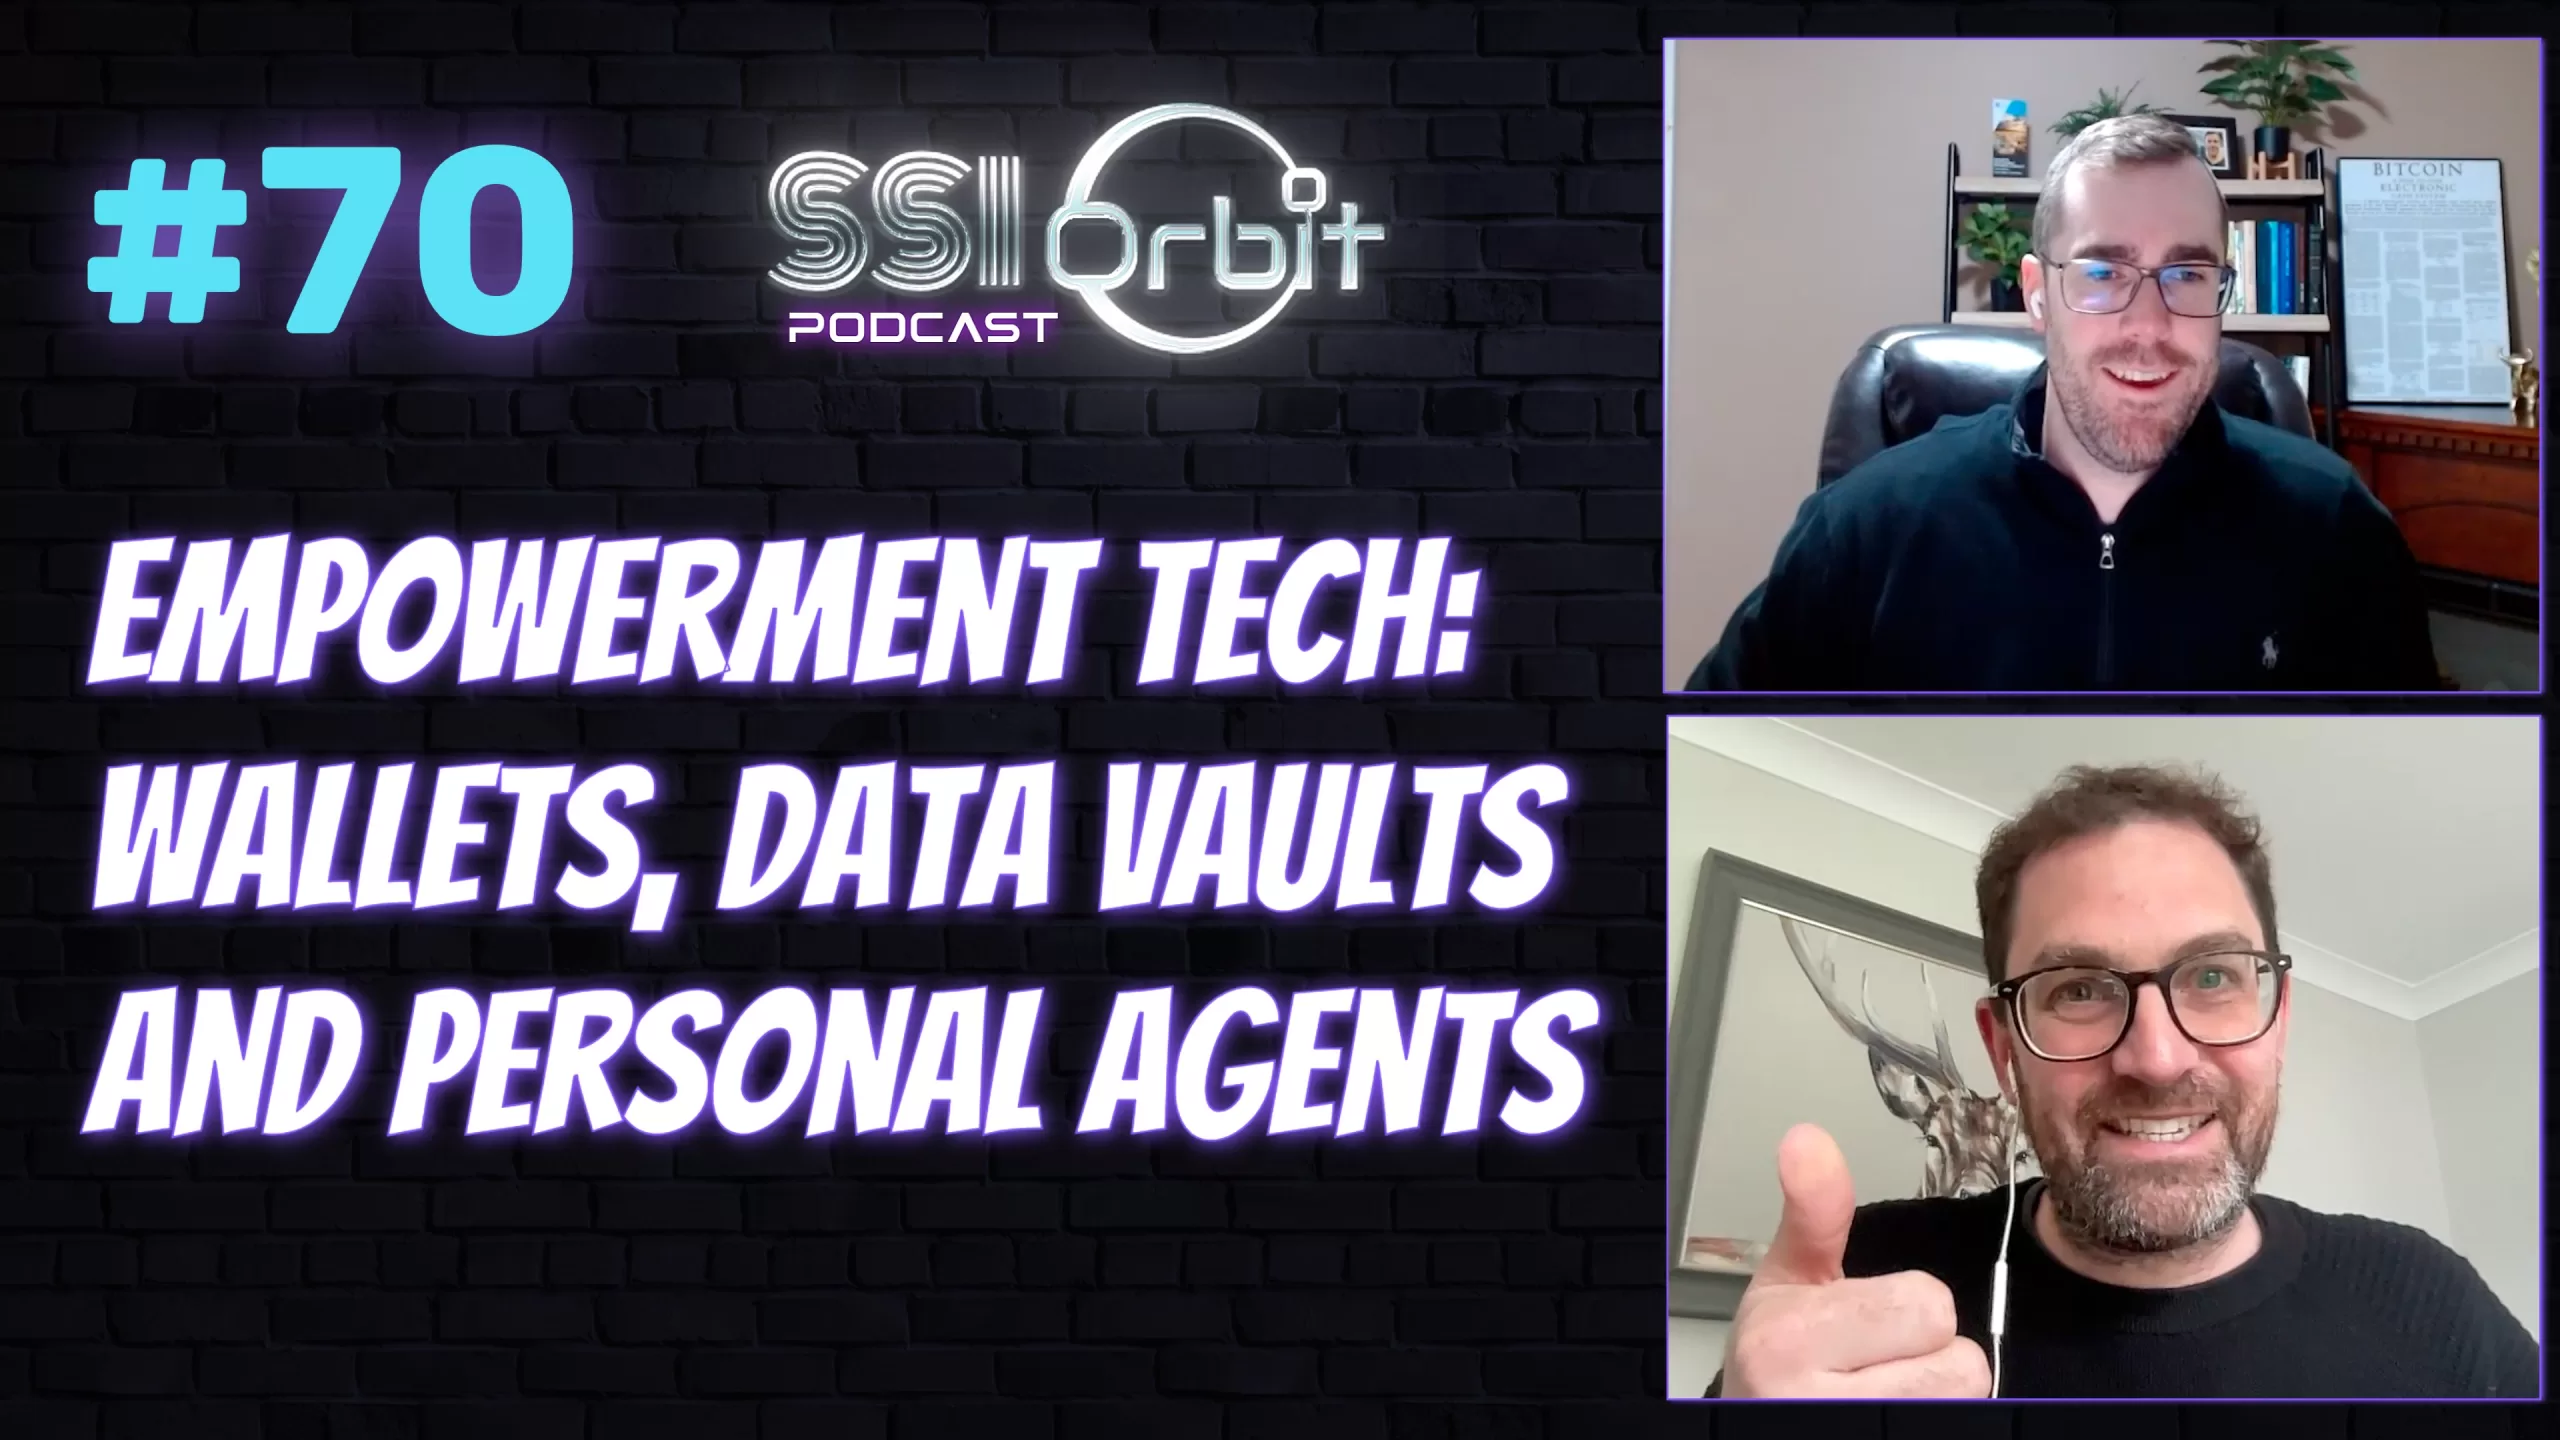 Empowerment Tech: Wallets, Data Vaults and Personal Agents (with Jamie Smith)